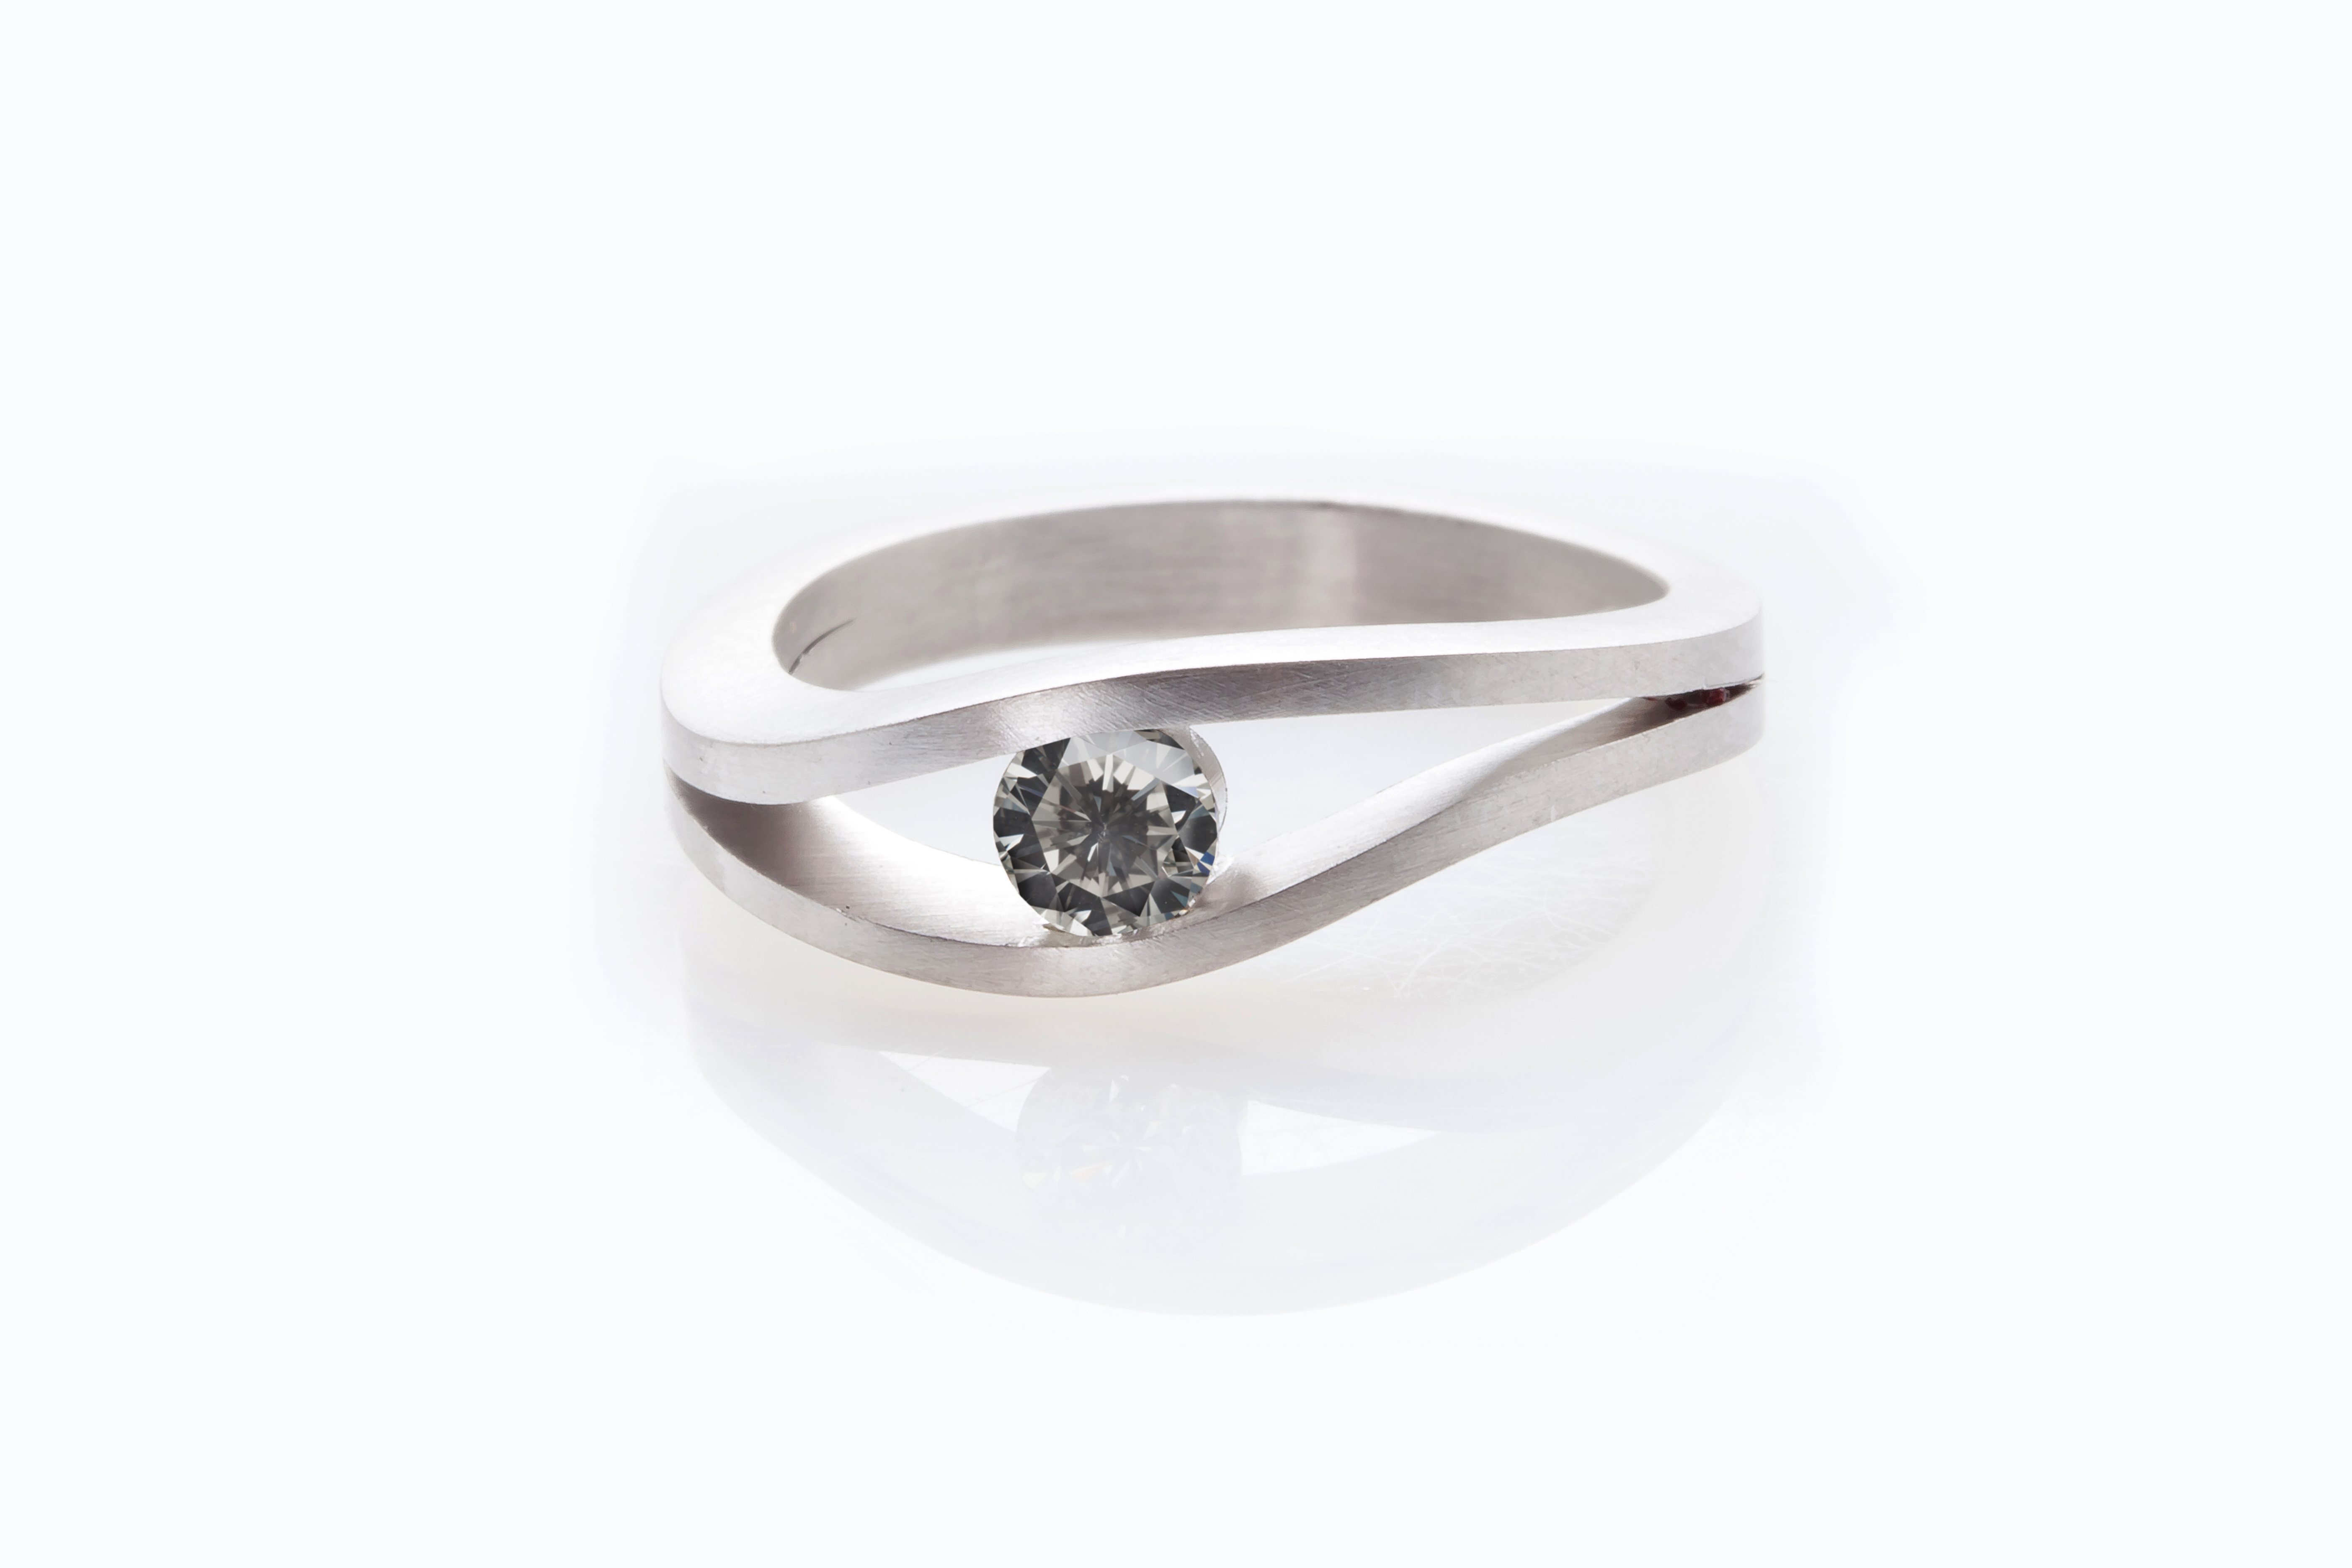 Natural Grey Diamond set in a Tension Ring